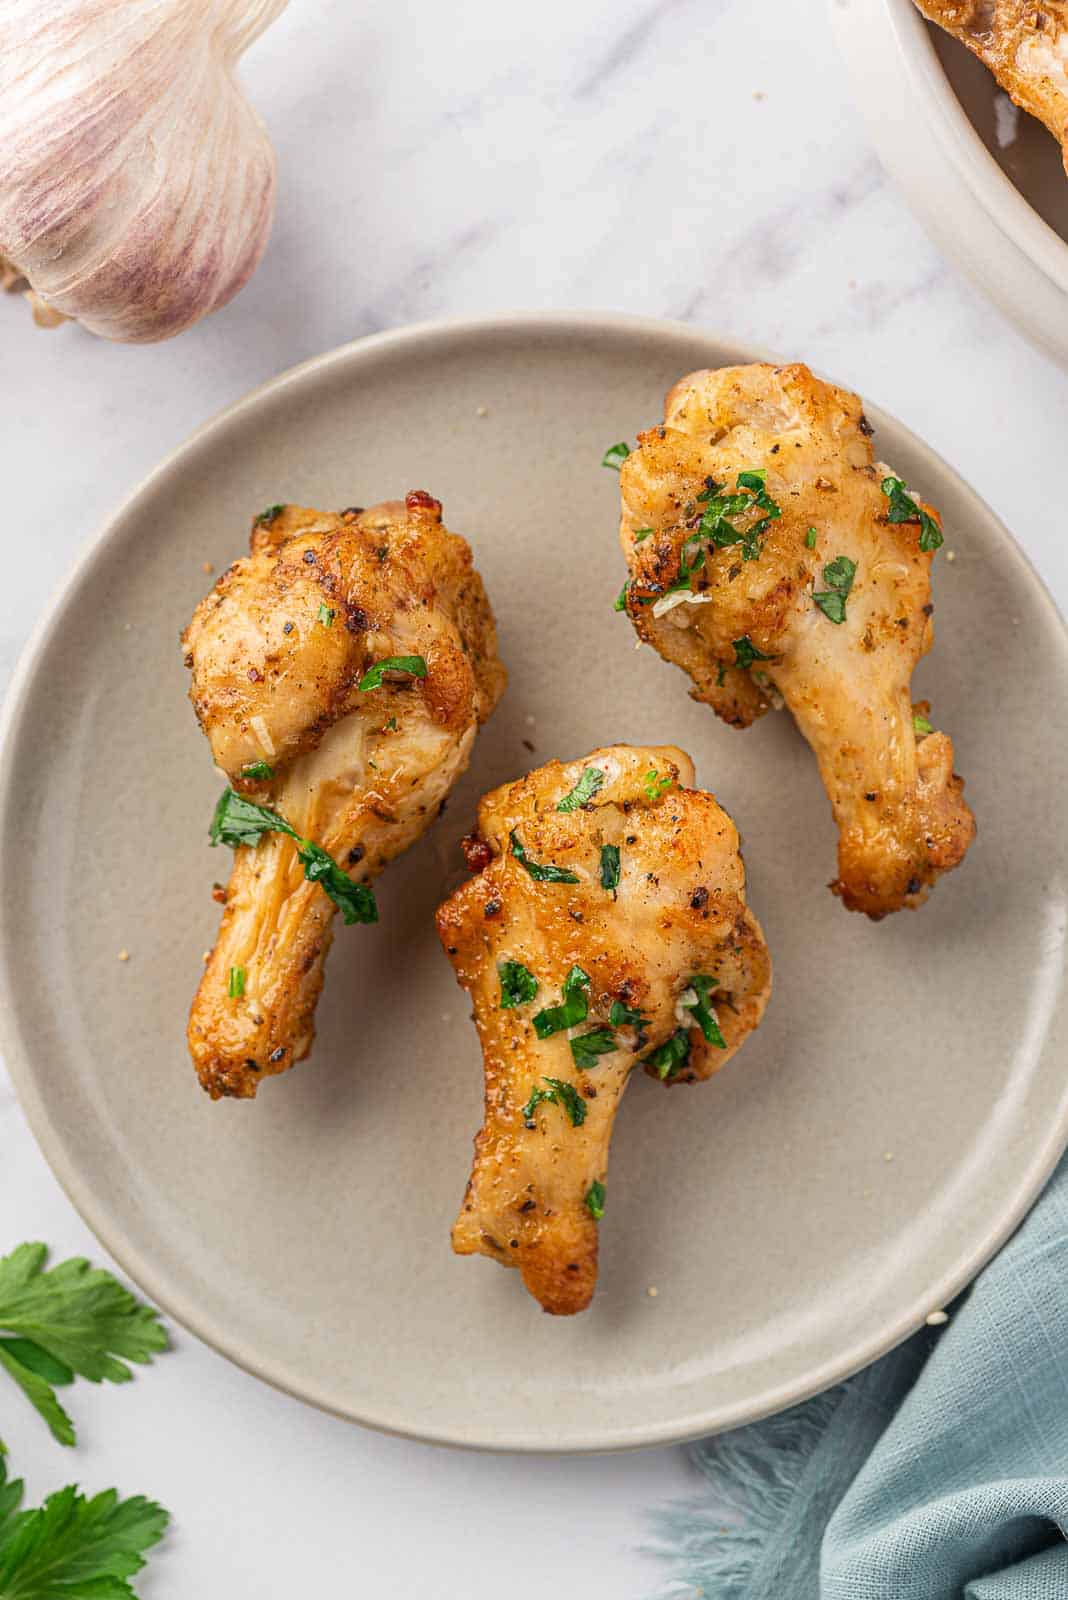 Three garlic chicken wings garnished with parsley rest on a plate.